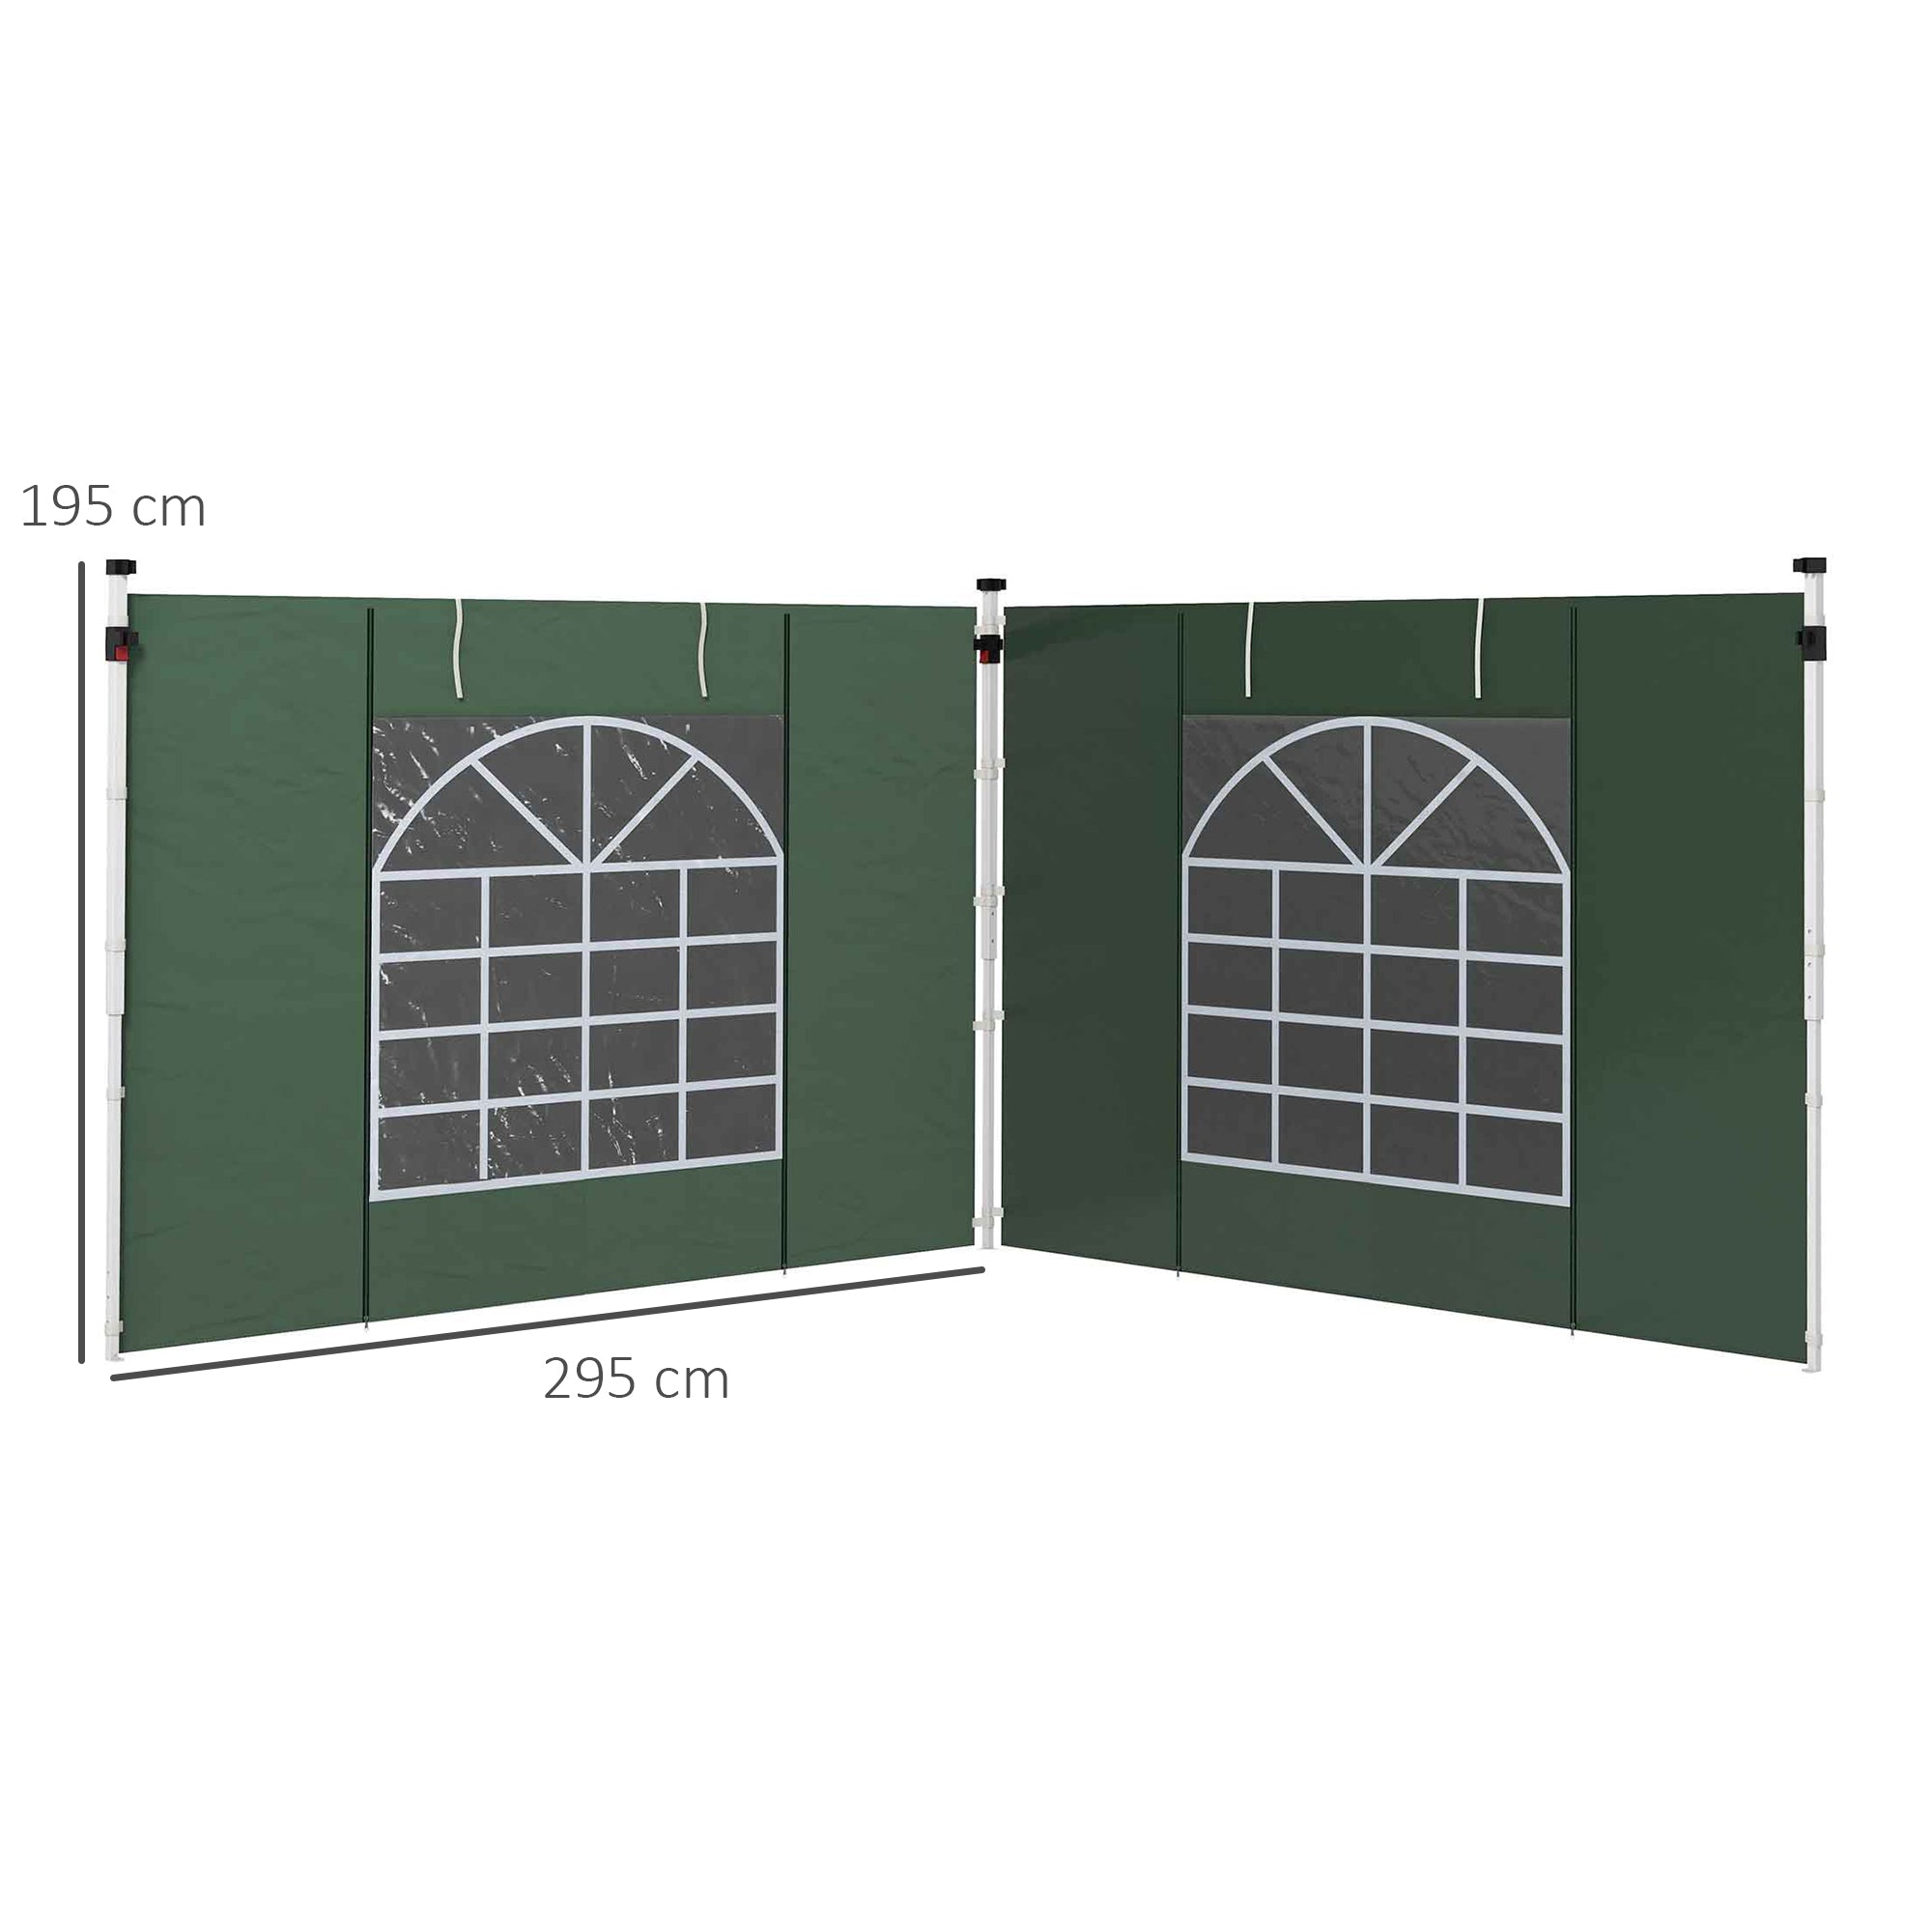 Outsunny Gazebo Side Panels, 2 Pack Sides Replacement, for 3x3(m) or 3x6m Pop Up Gazebo, with Windows and Doors, Green